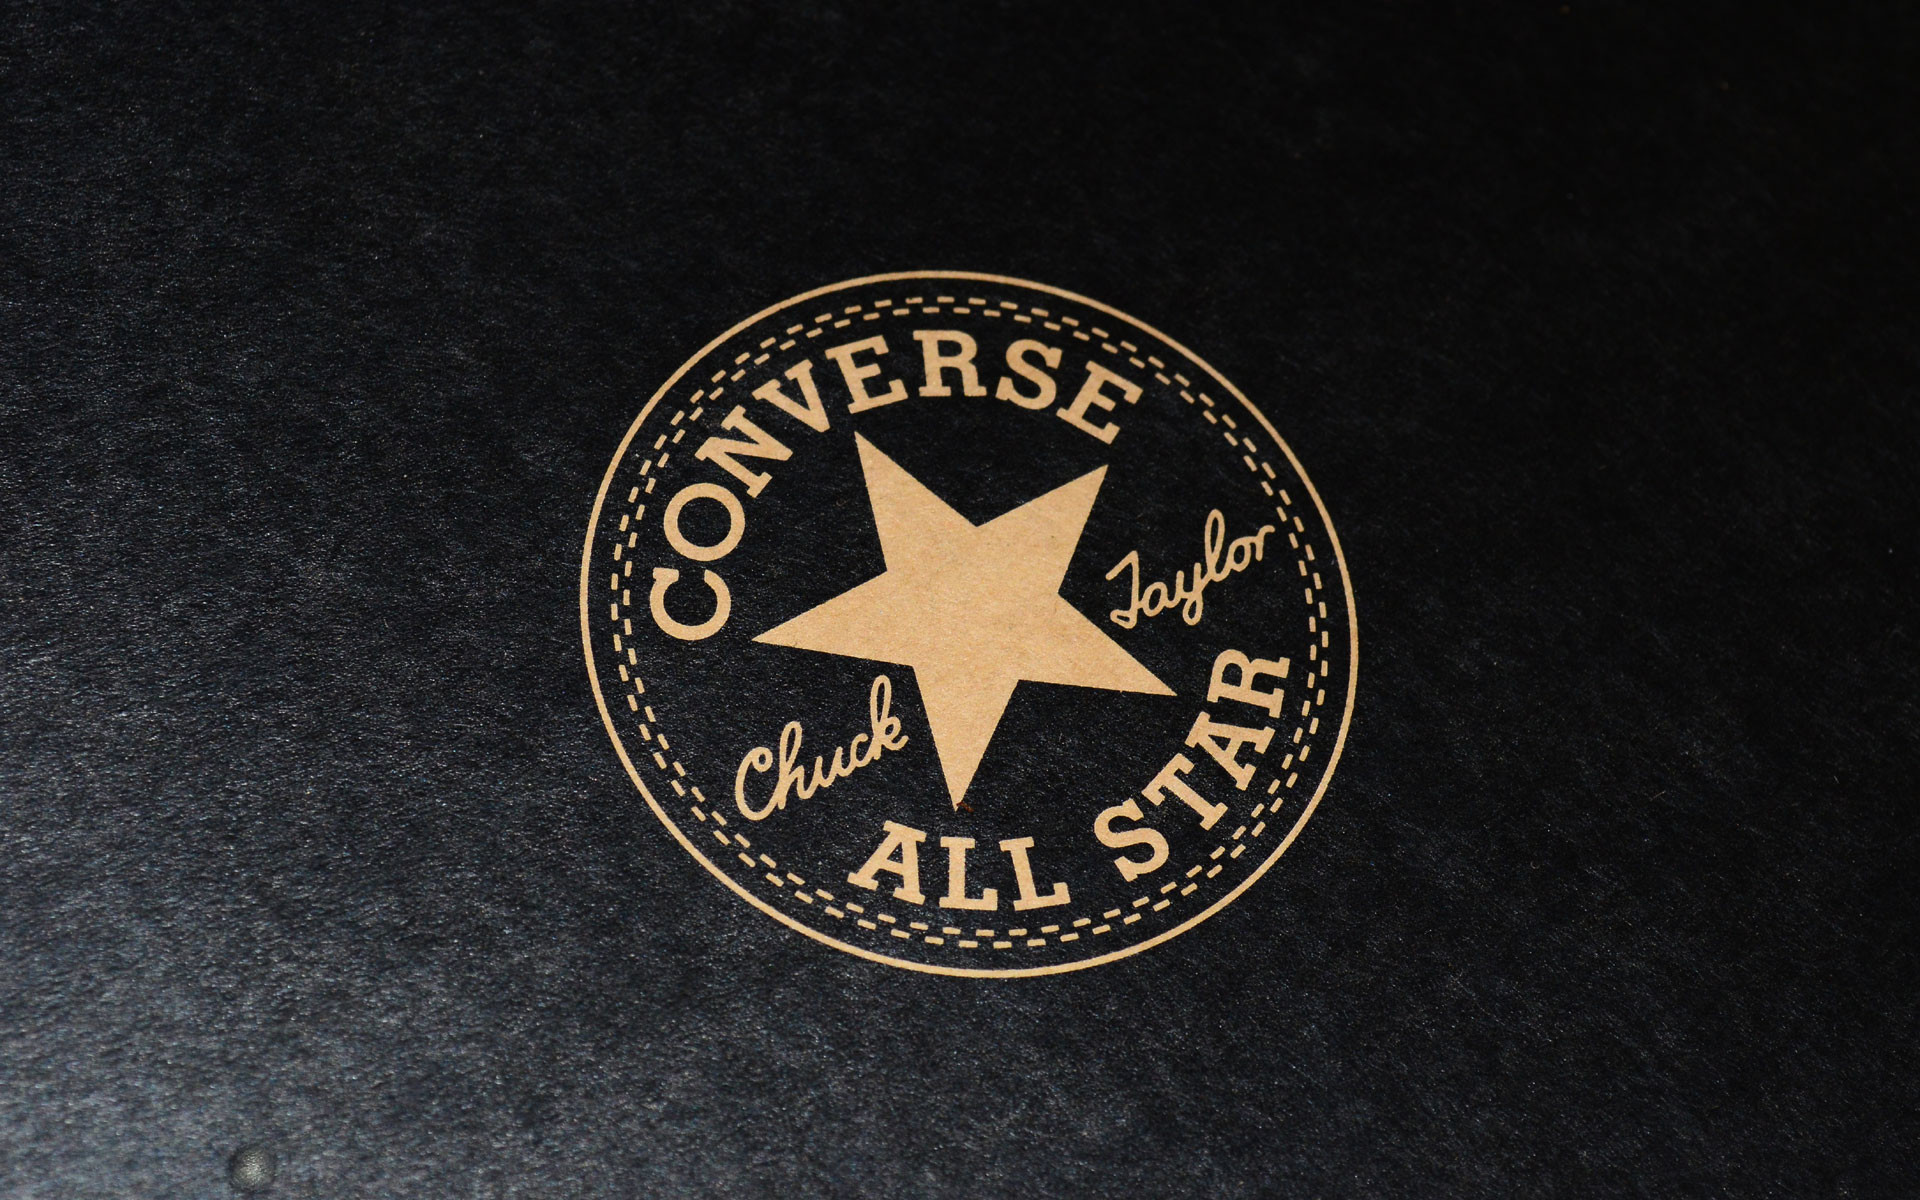 1920x1200 Related Wallpapers from Golden State Warriors Logo Wallpaper. Converse Logo